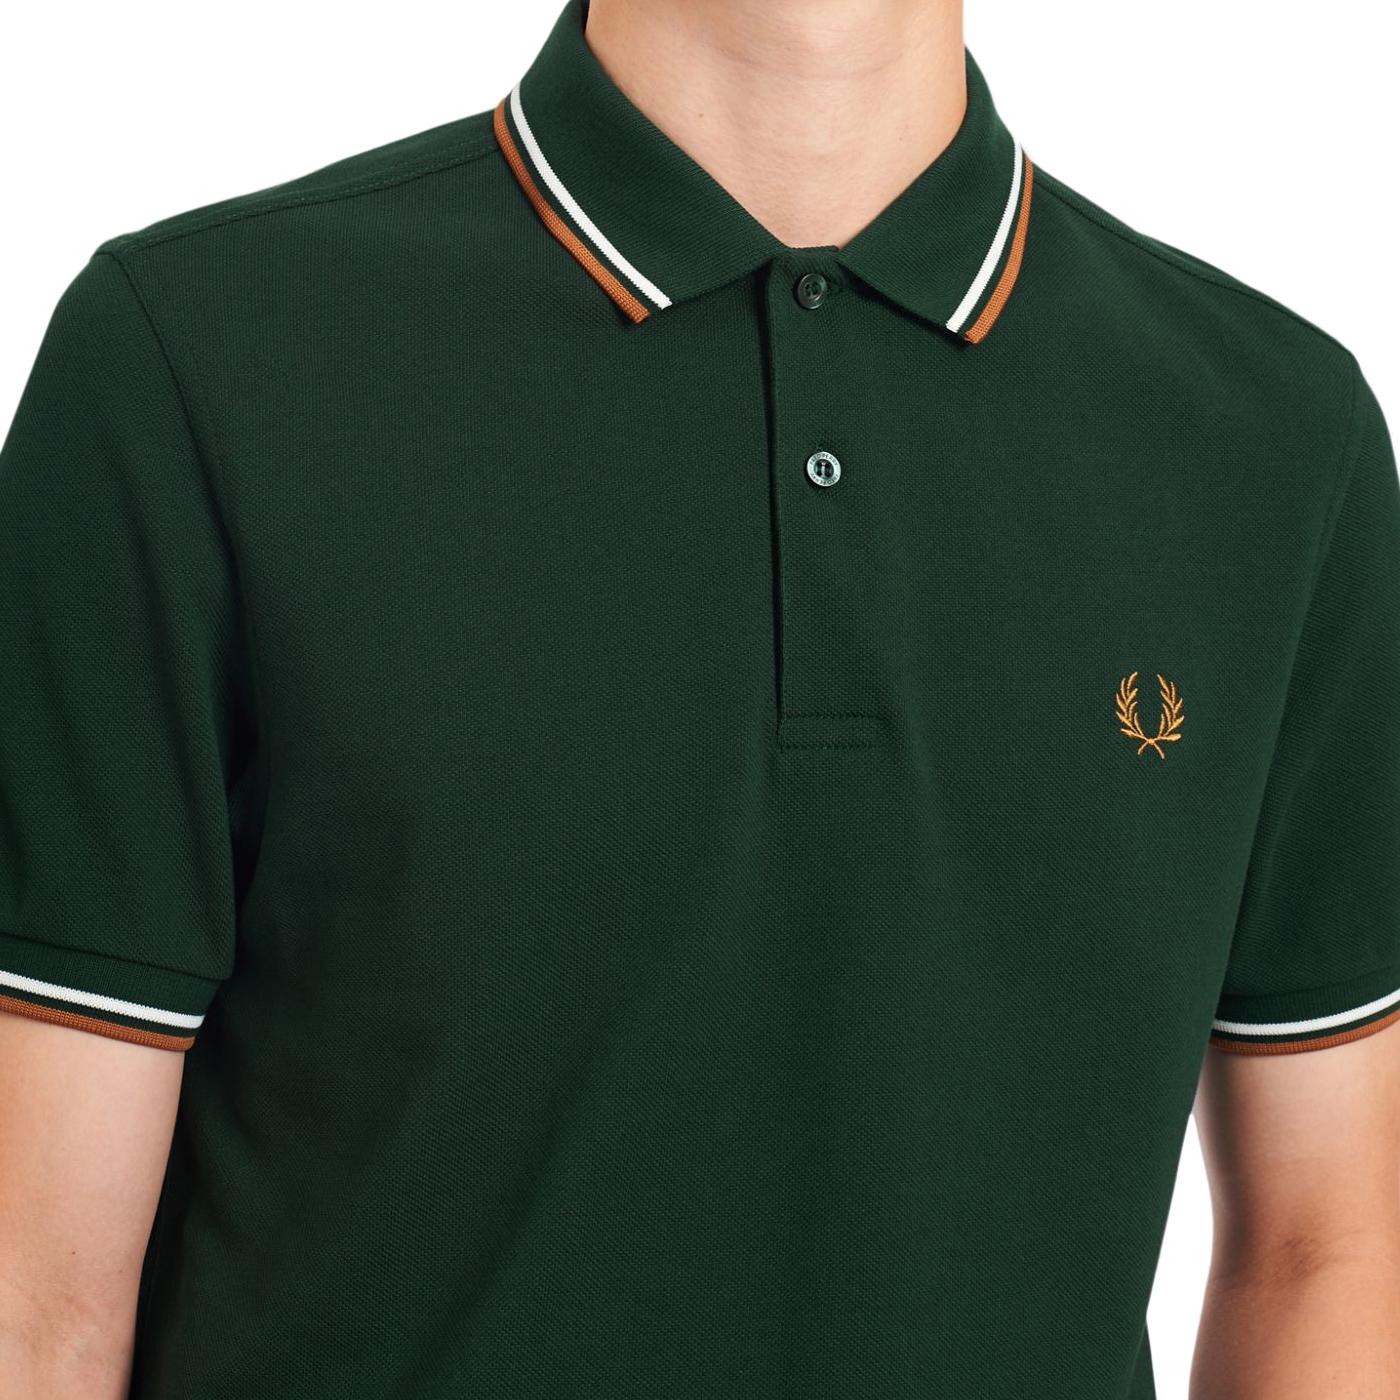 FRED PERRY M3600 Men's Twin Tipped Pique Polo Evergreen